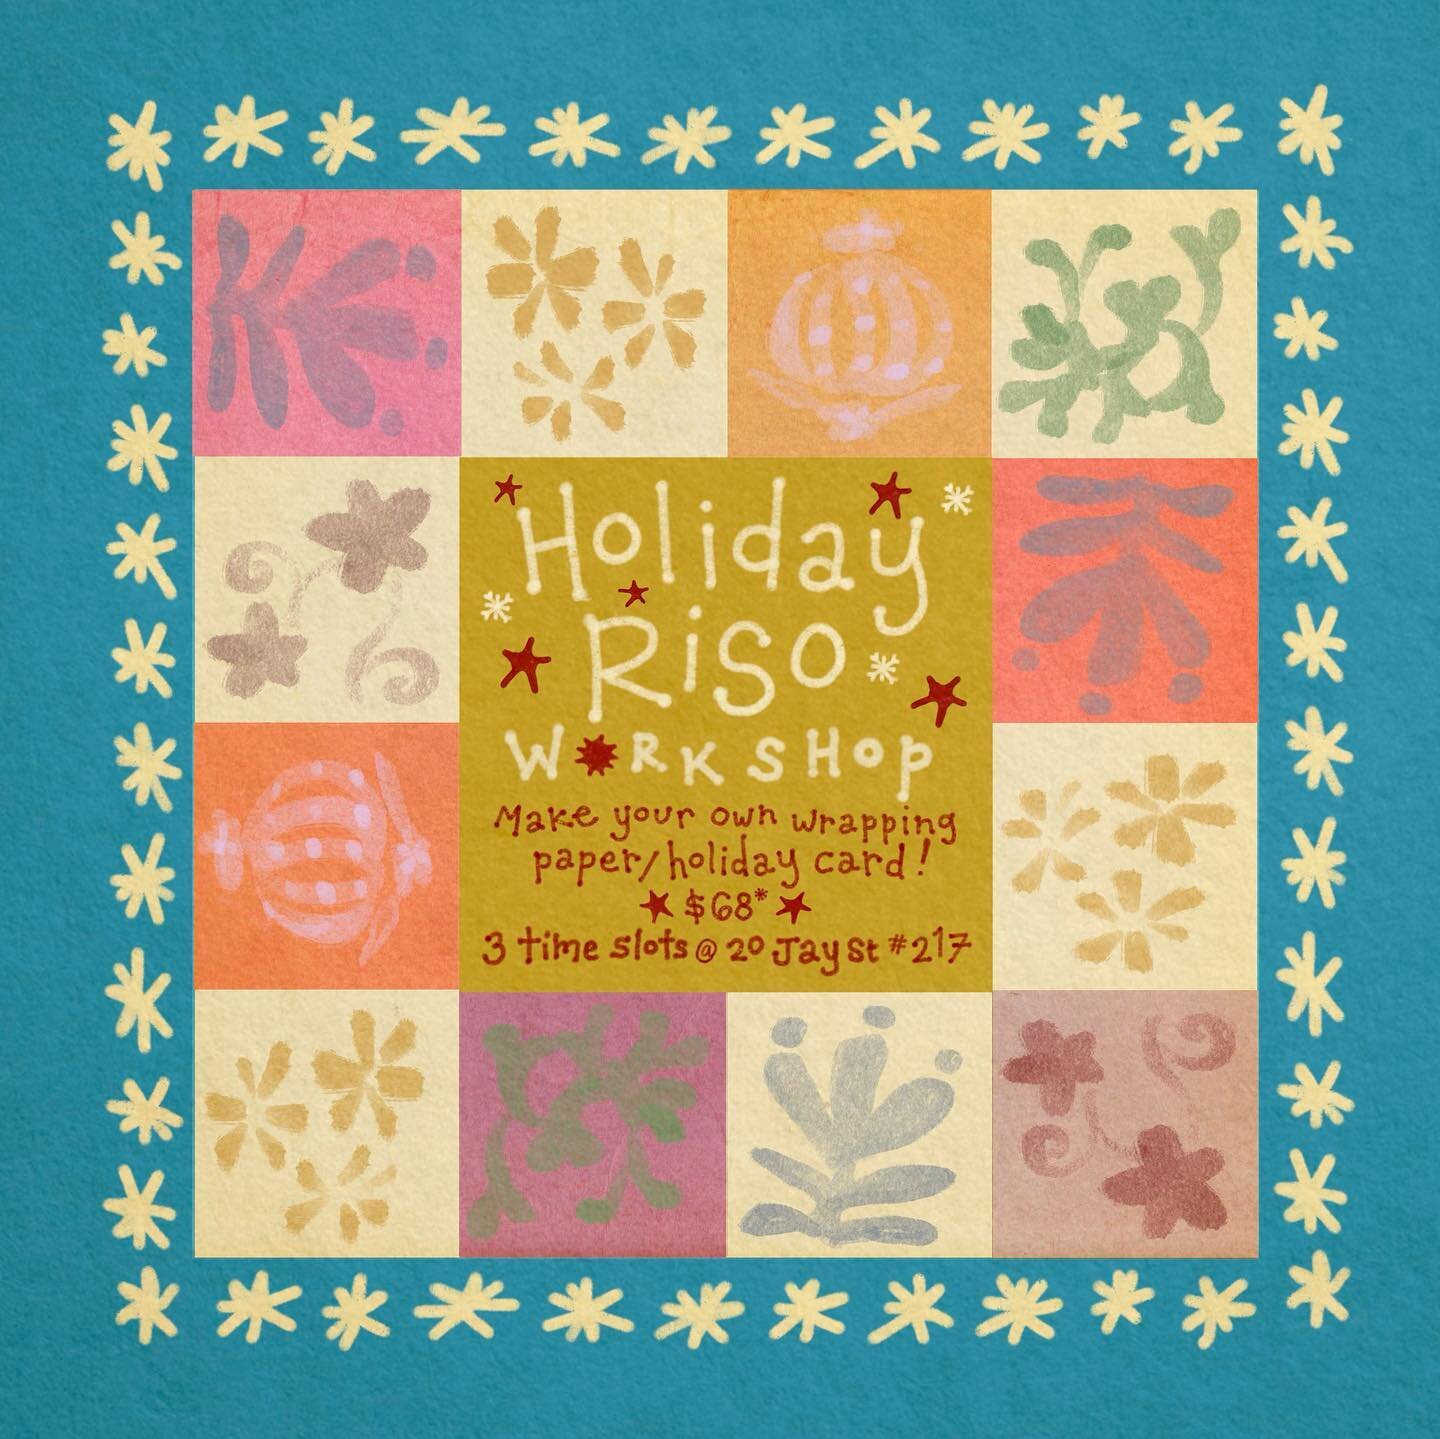 In conjunction with our lucky &amp; friends holiday market on 12/2, we are running holiday riso workshops in our studio (same building as @usaginy the market venue!). This will be a demo-style workshop to provide a beginner experience in printing wit